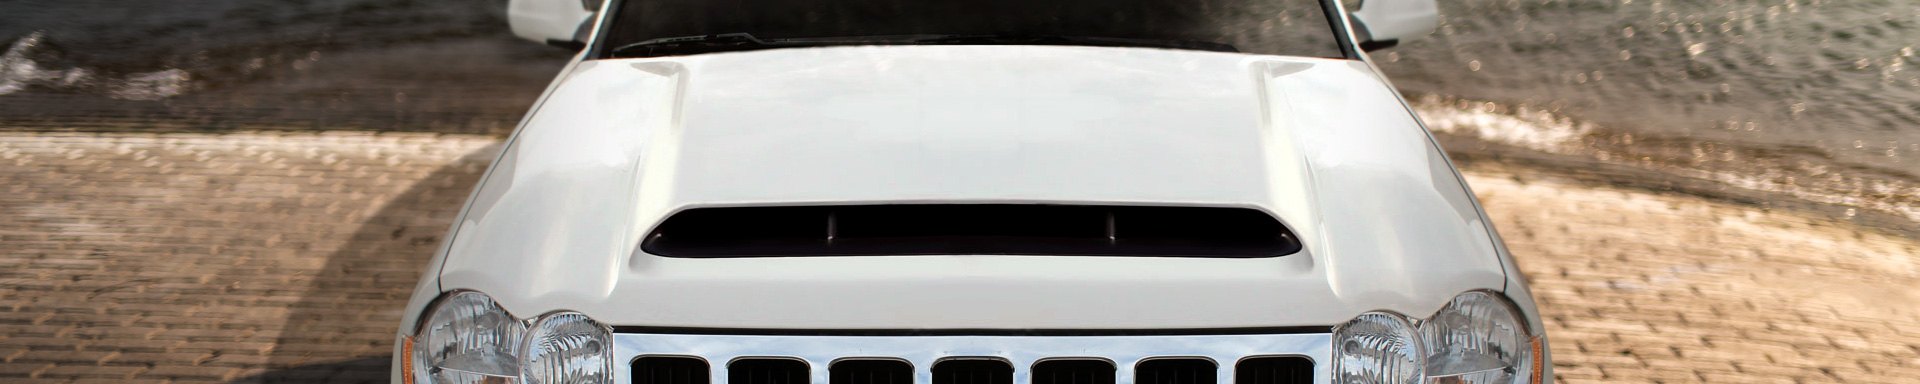 Demon-Style Hood is Now Available For a 2005-2010 Jeep Grand Cherokee